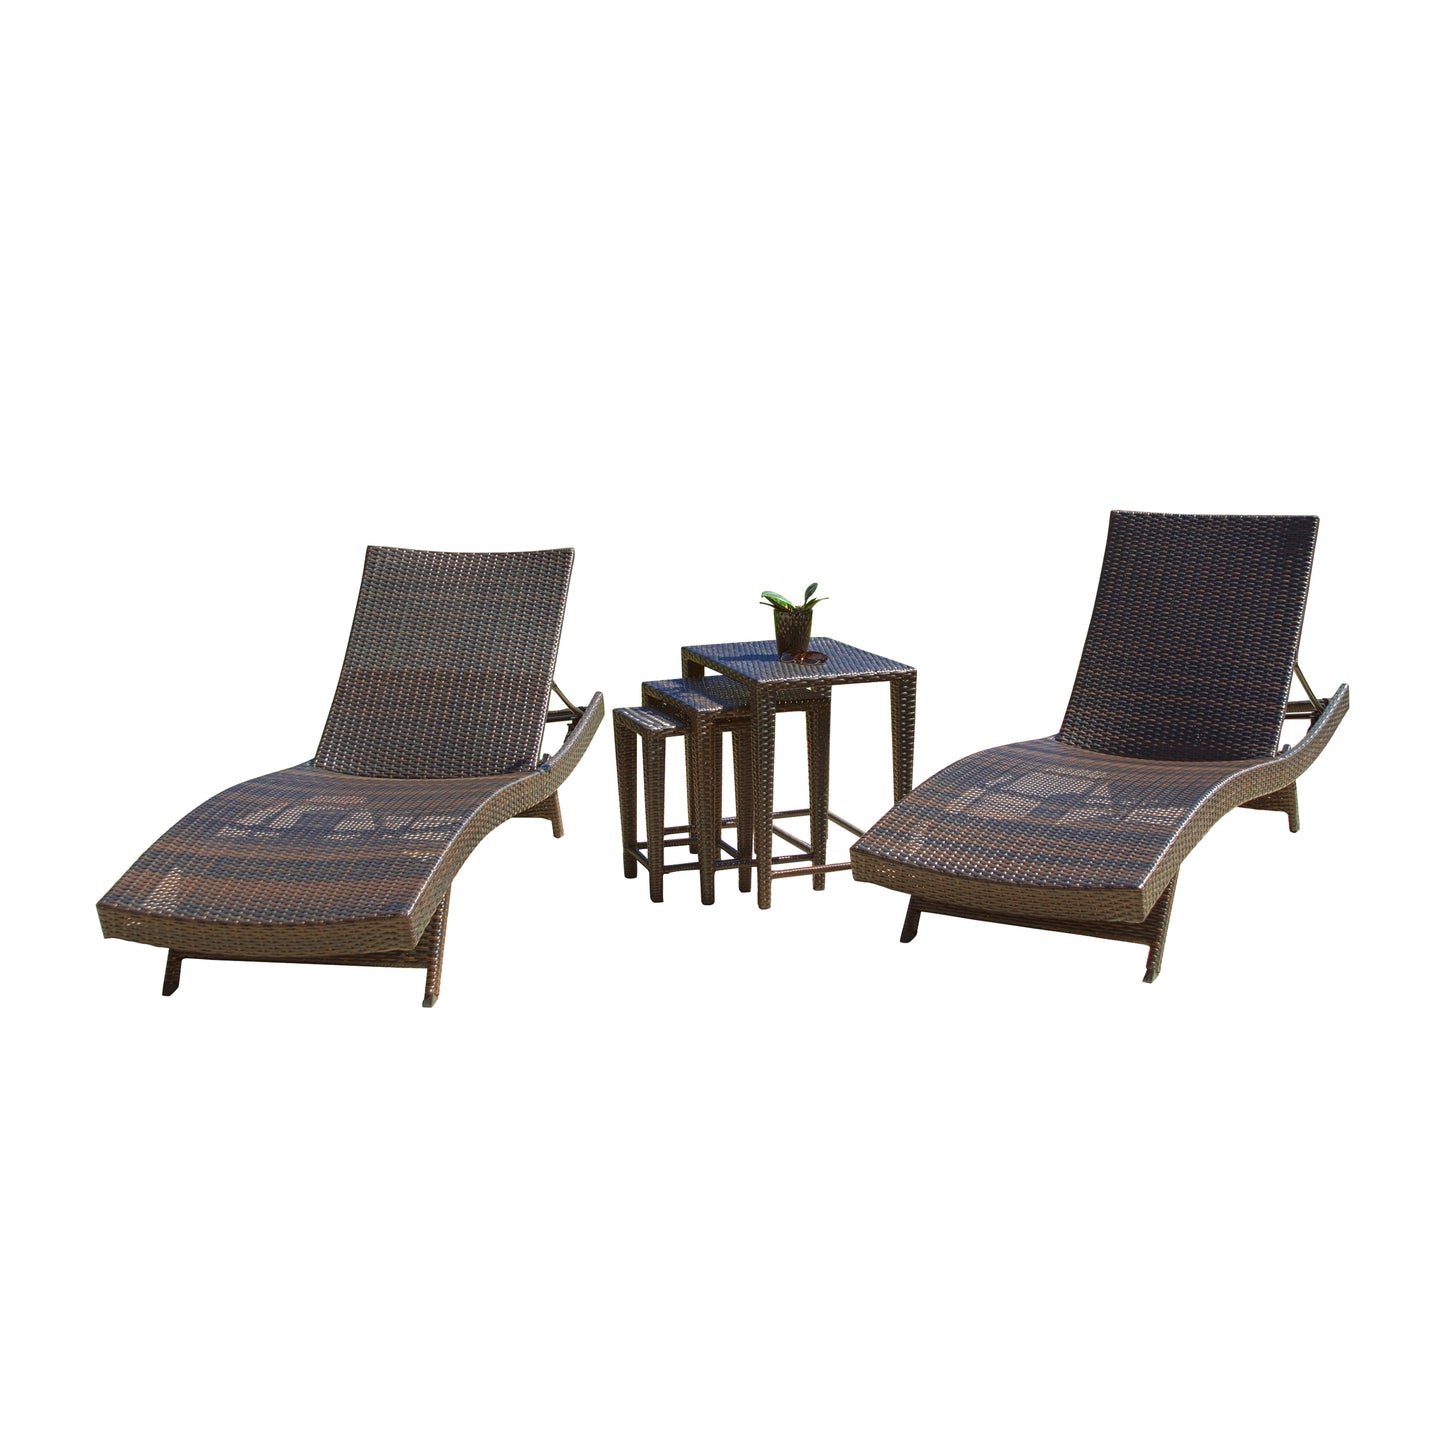 Lakeport 5p Outdoor Adjustable Chaise Lounge Set